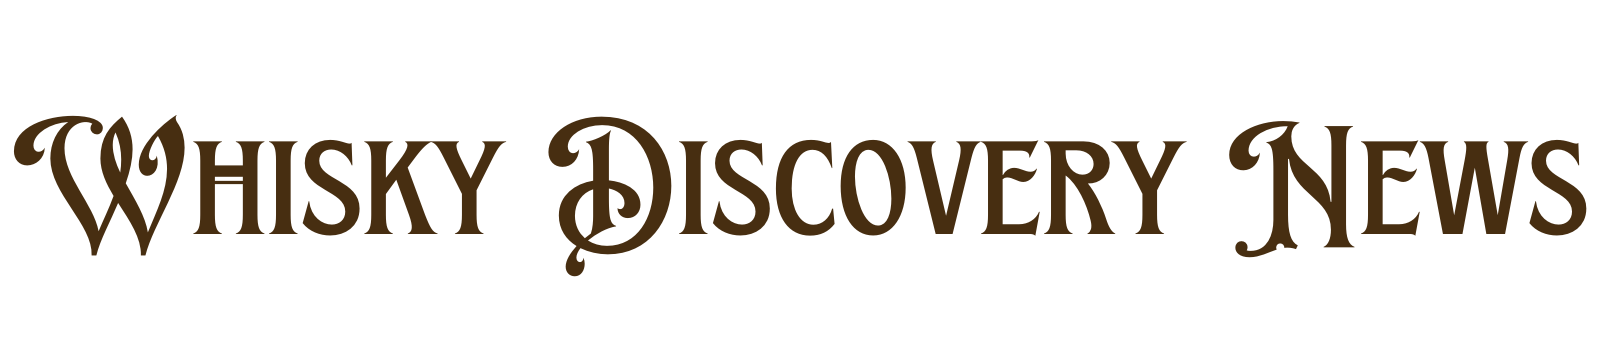 Whisky Discovery News